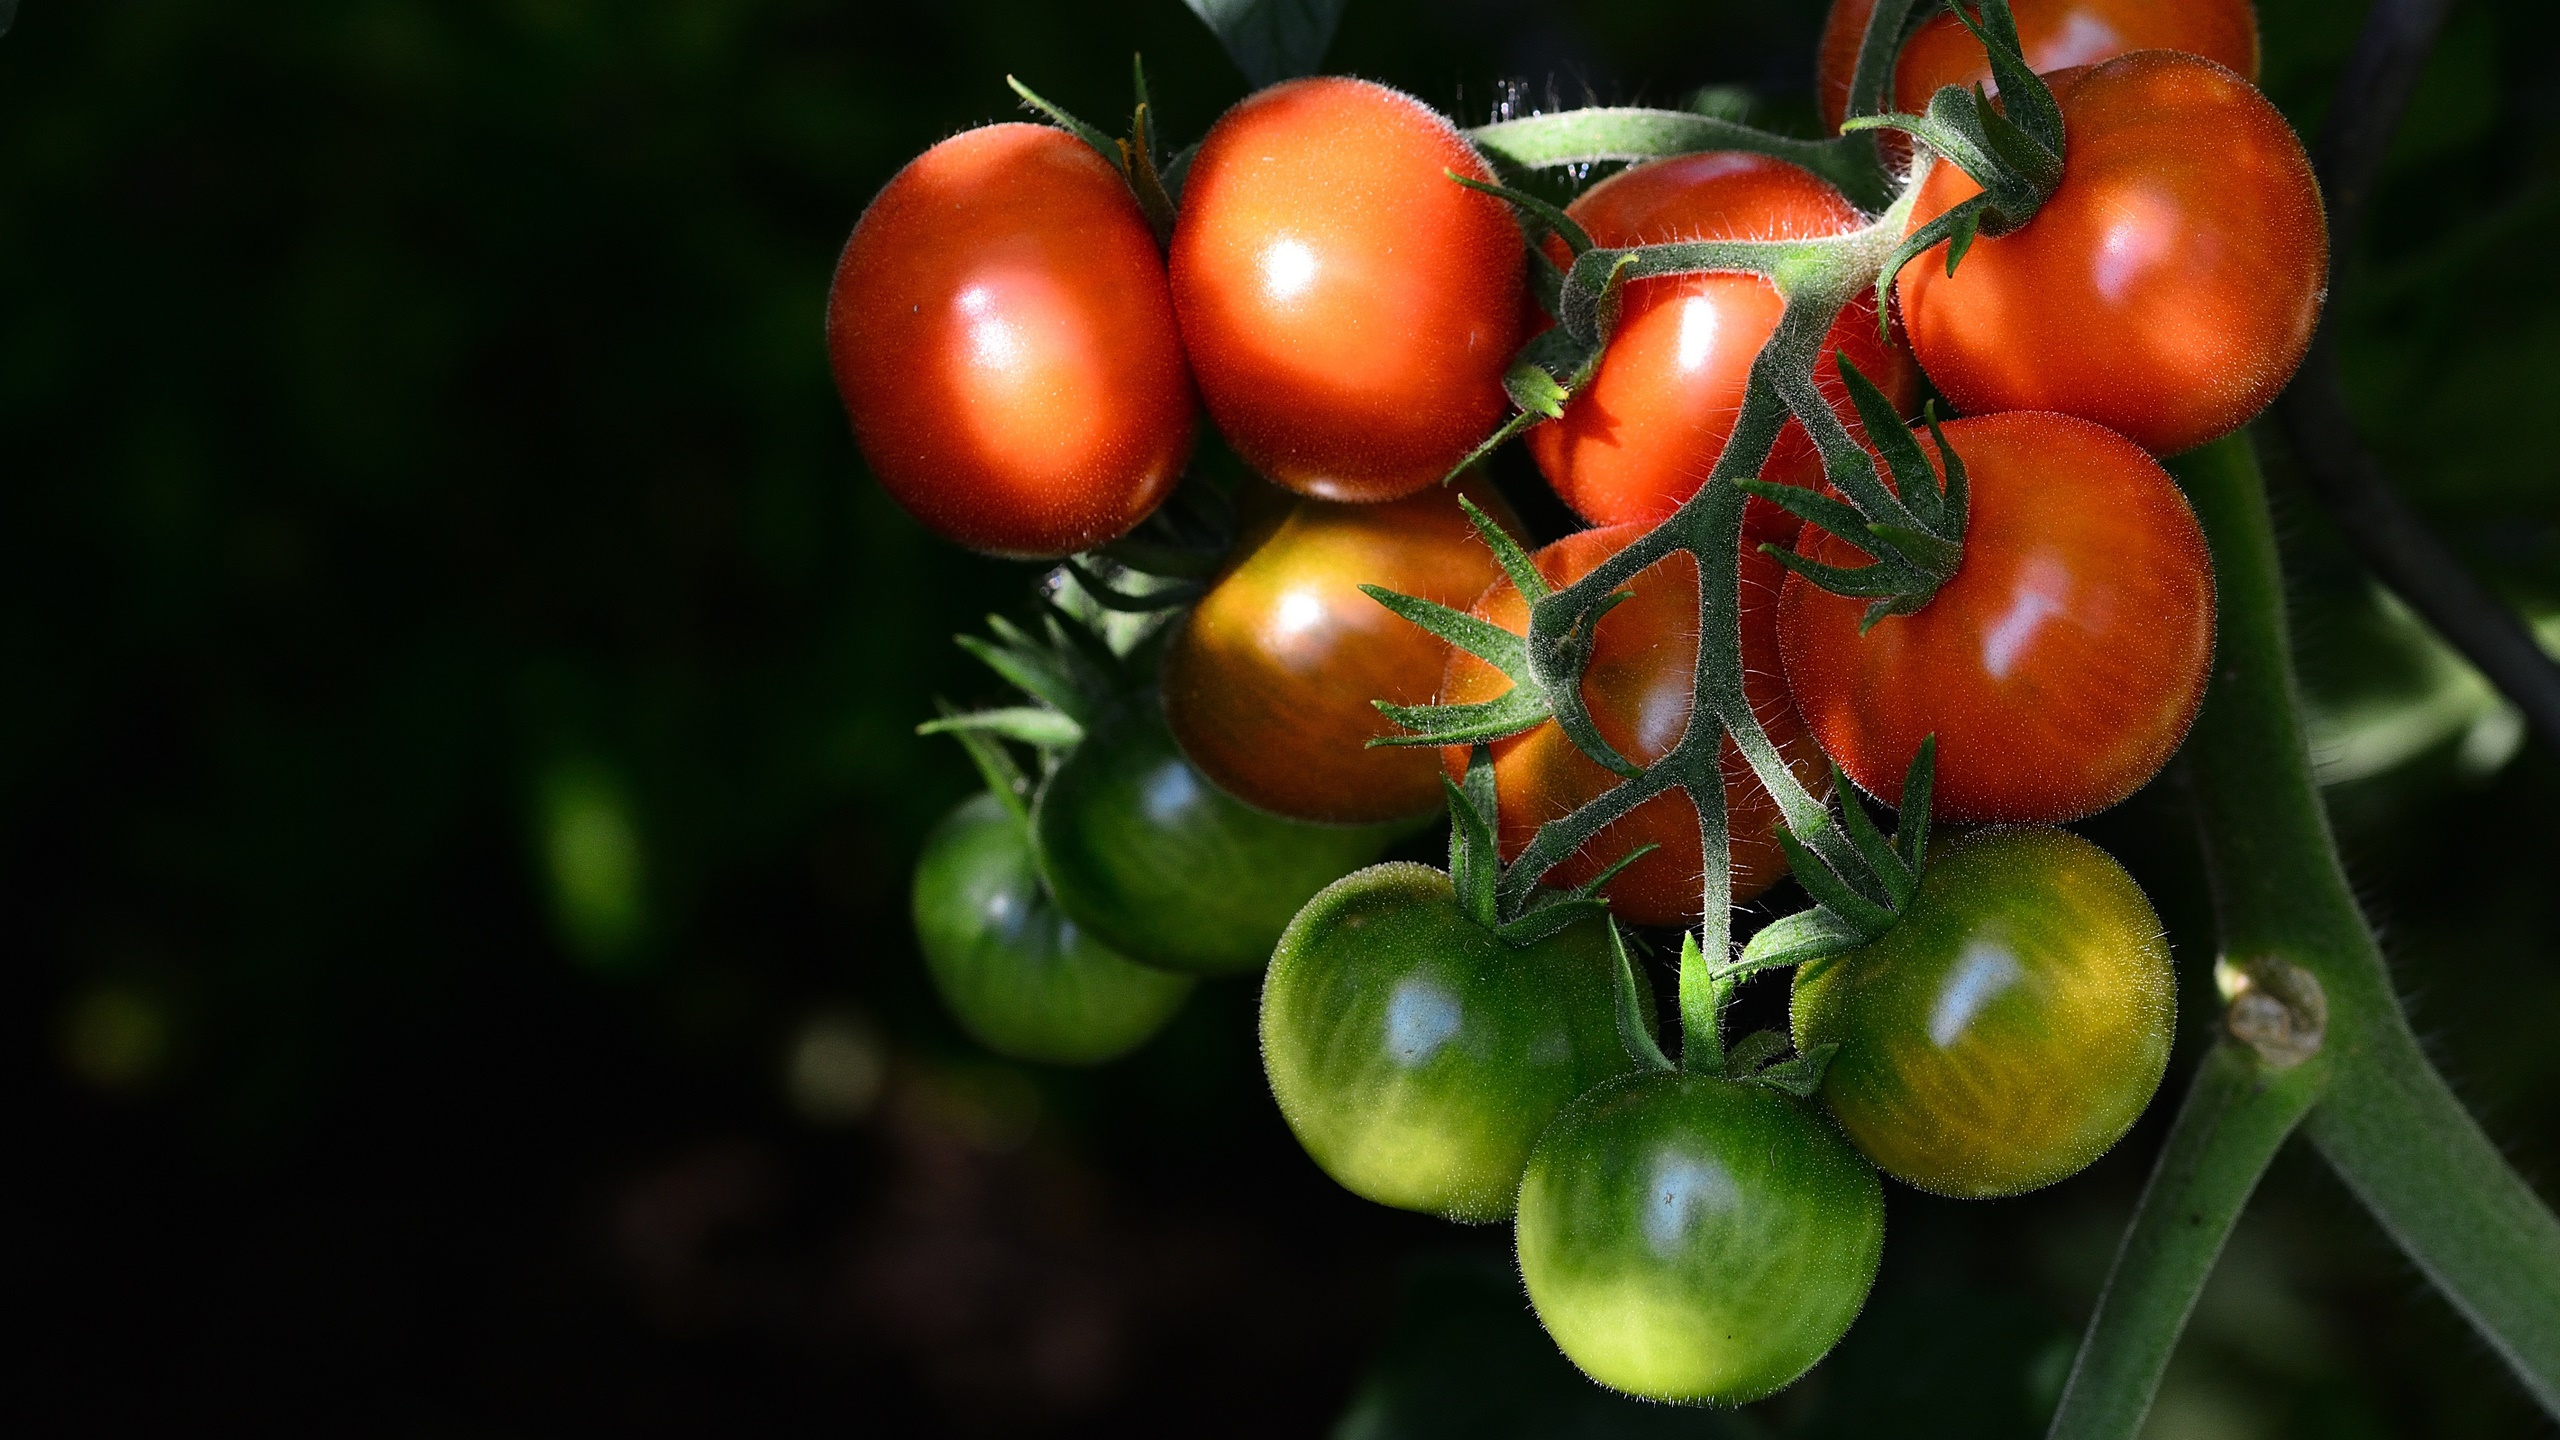 General 2560x1440 food vegetables tomatoes vibrant